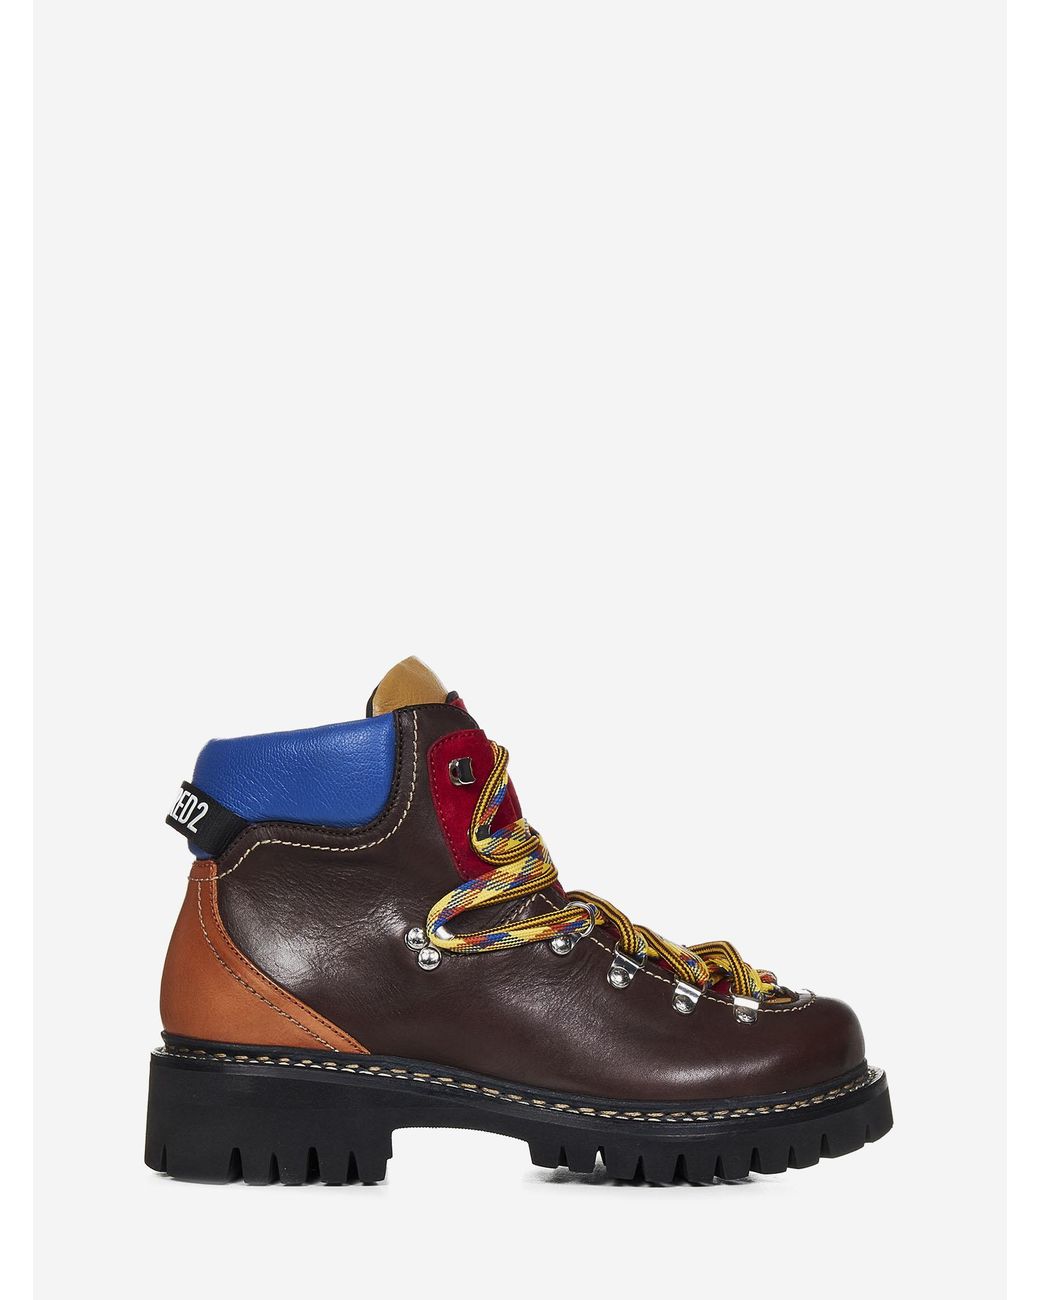 DSquared² Sunset Leaf Boots in Brown for Men | Lyst